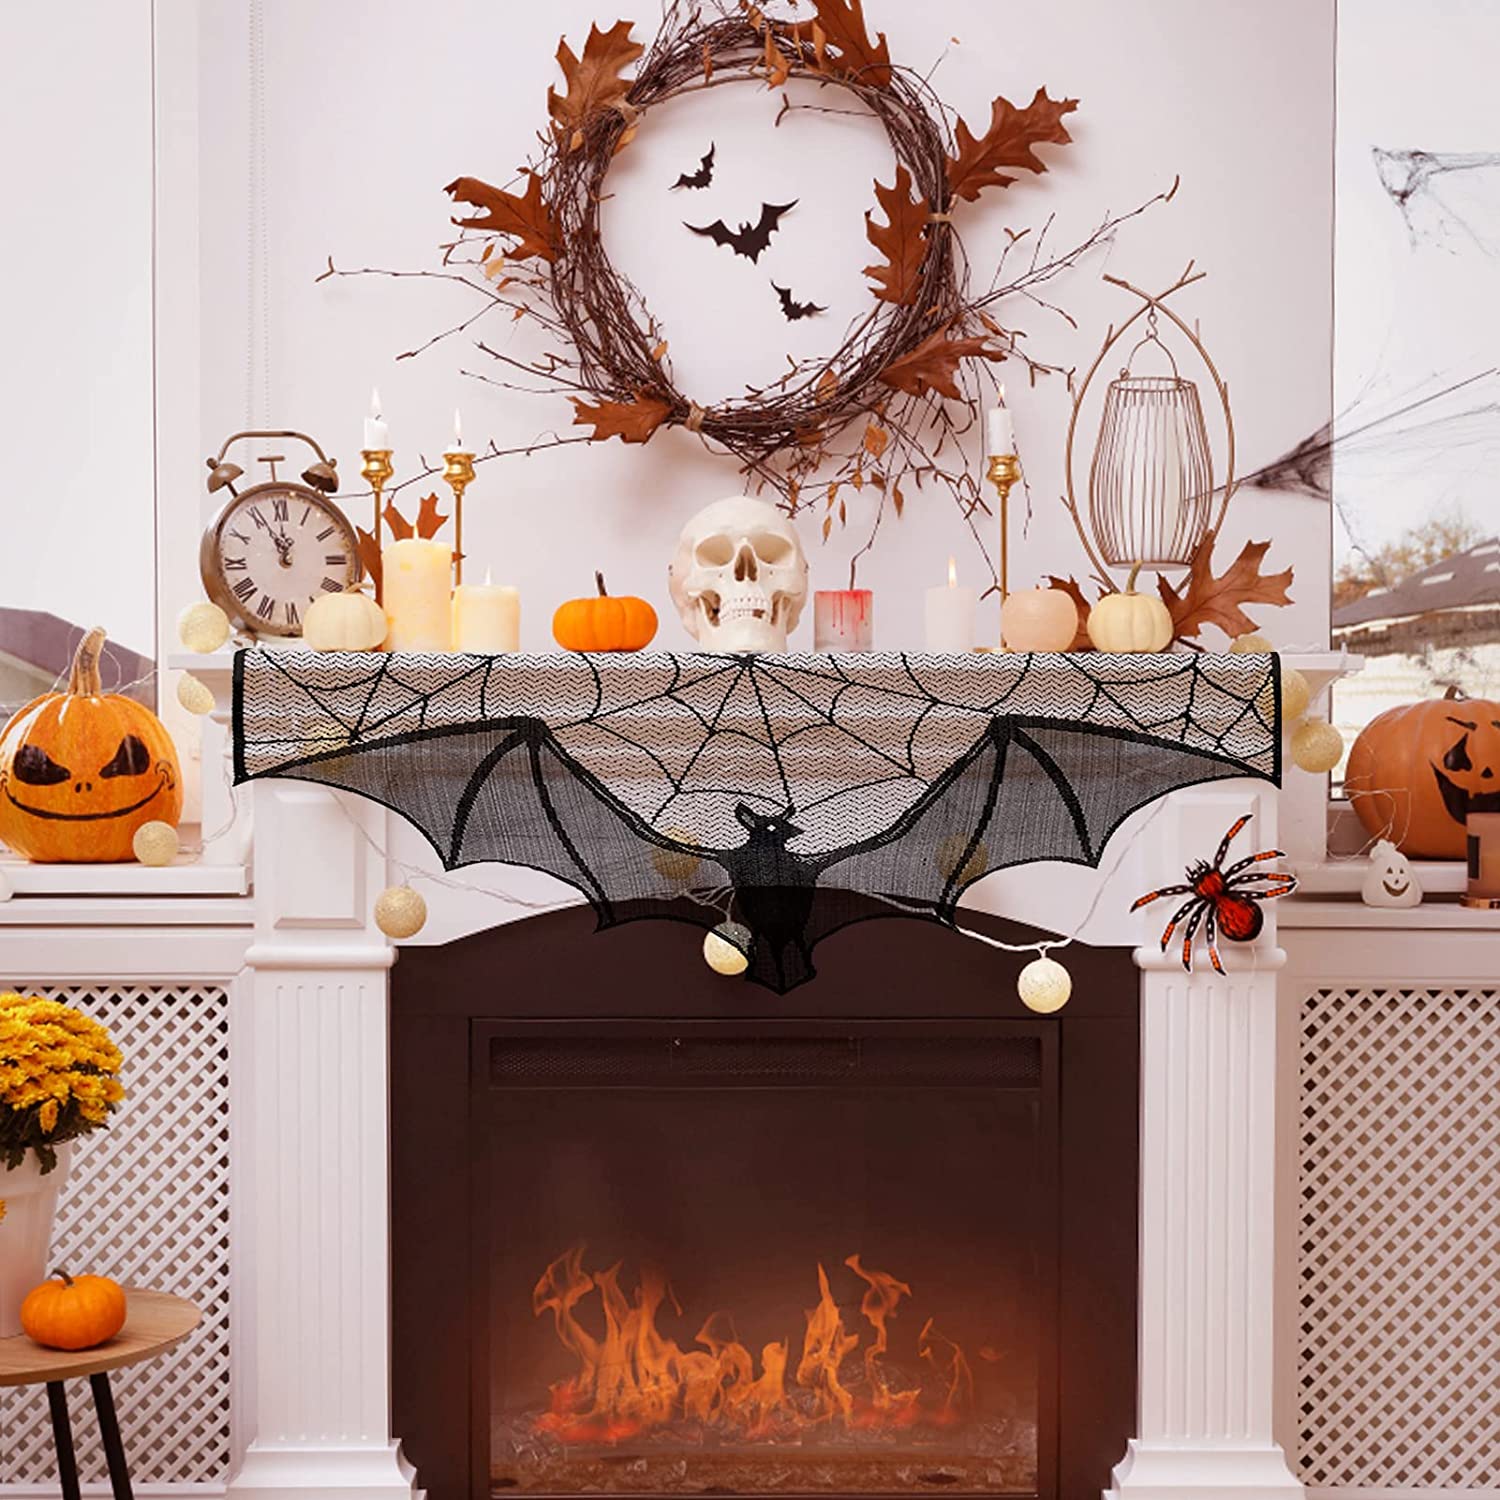 Halloween Black Lace Spiderweb- 2 Pcs Bat Curtain For Window, Curtains, or Fireplace Mantle - Scary Home Decor